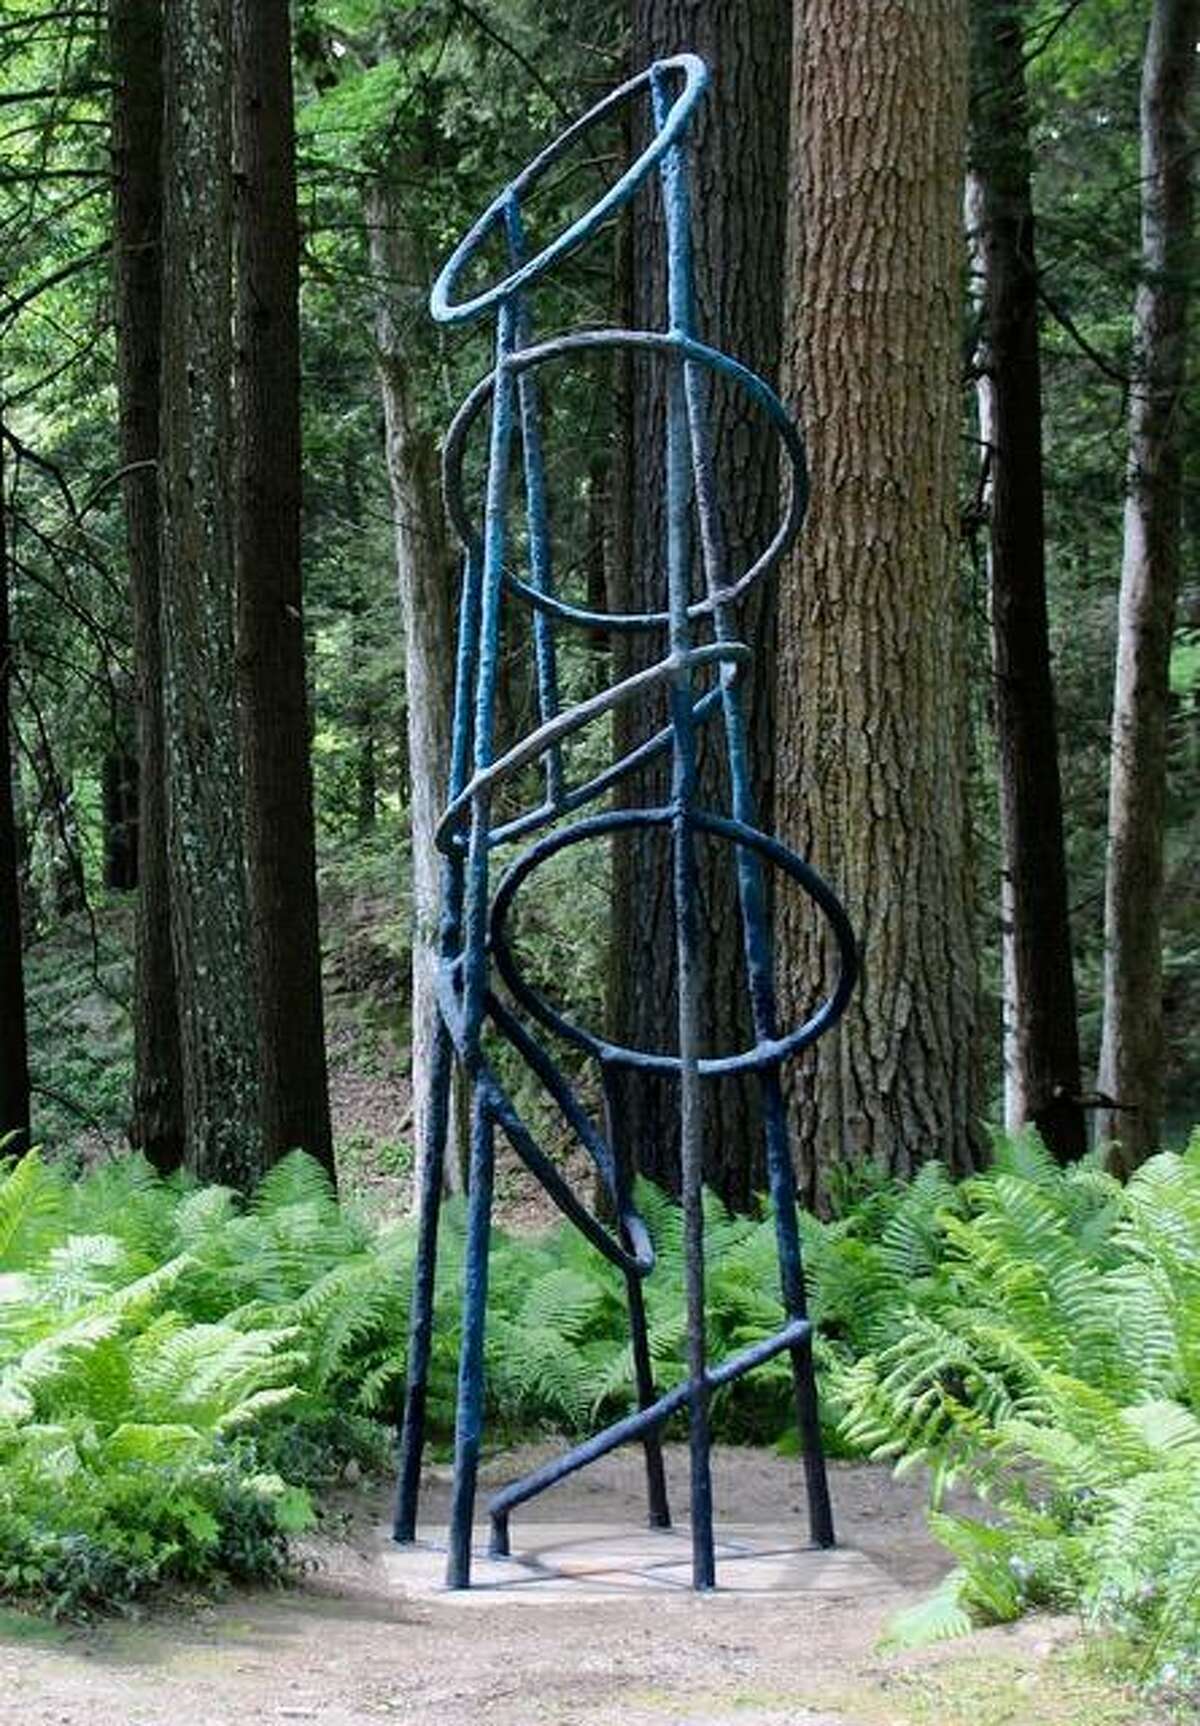 Artist Joe Chirchirillo’s piece “Ring Tower” is on the New Canaan Land Trust’s Sculpture Trail.